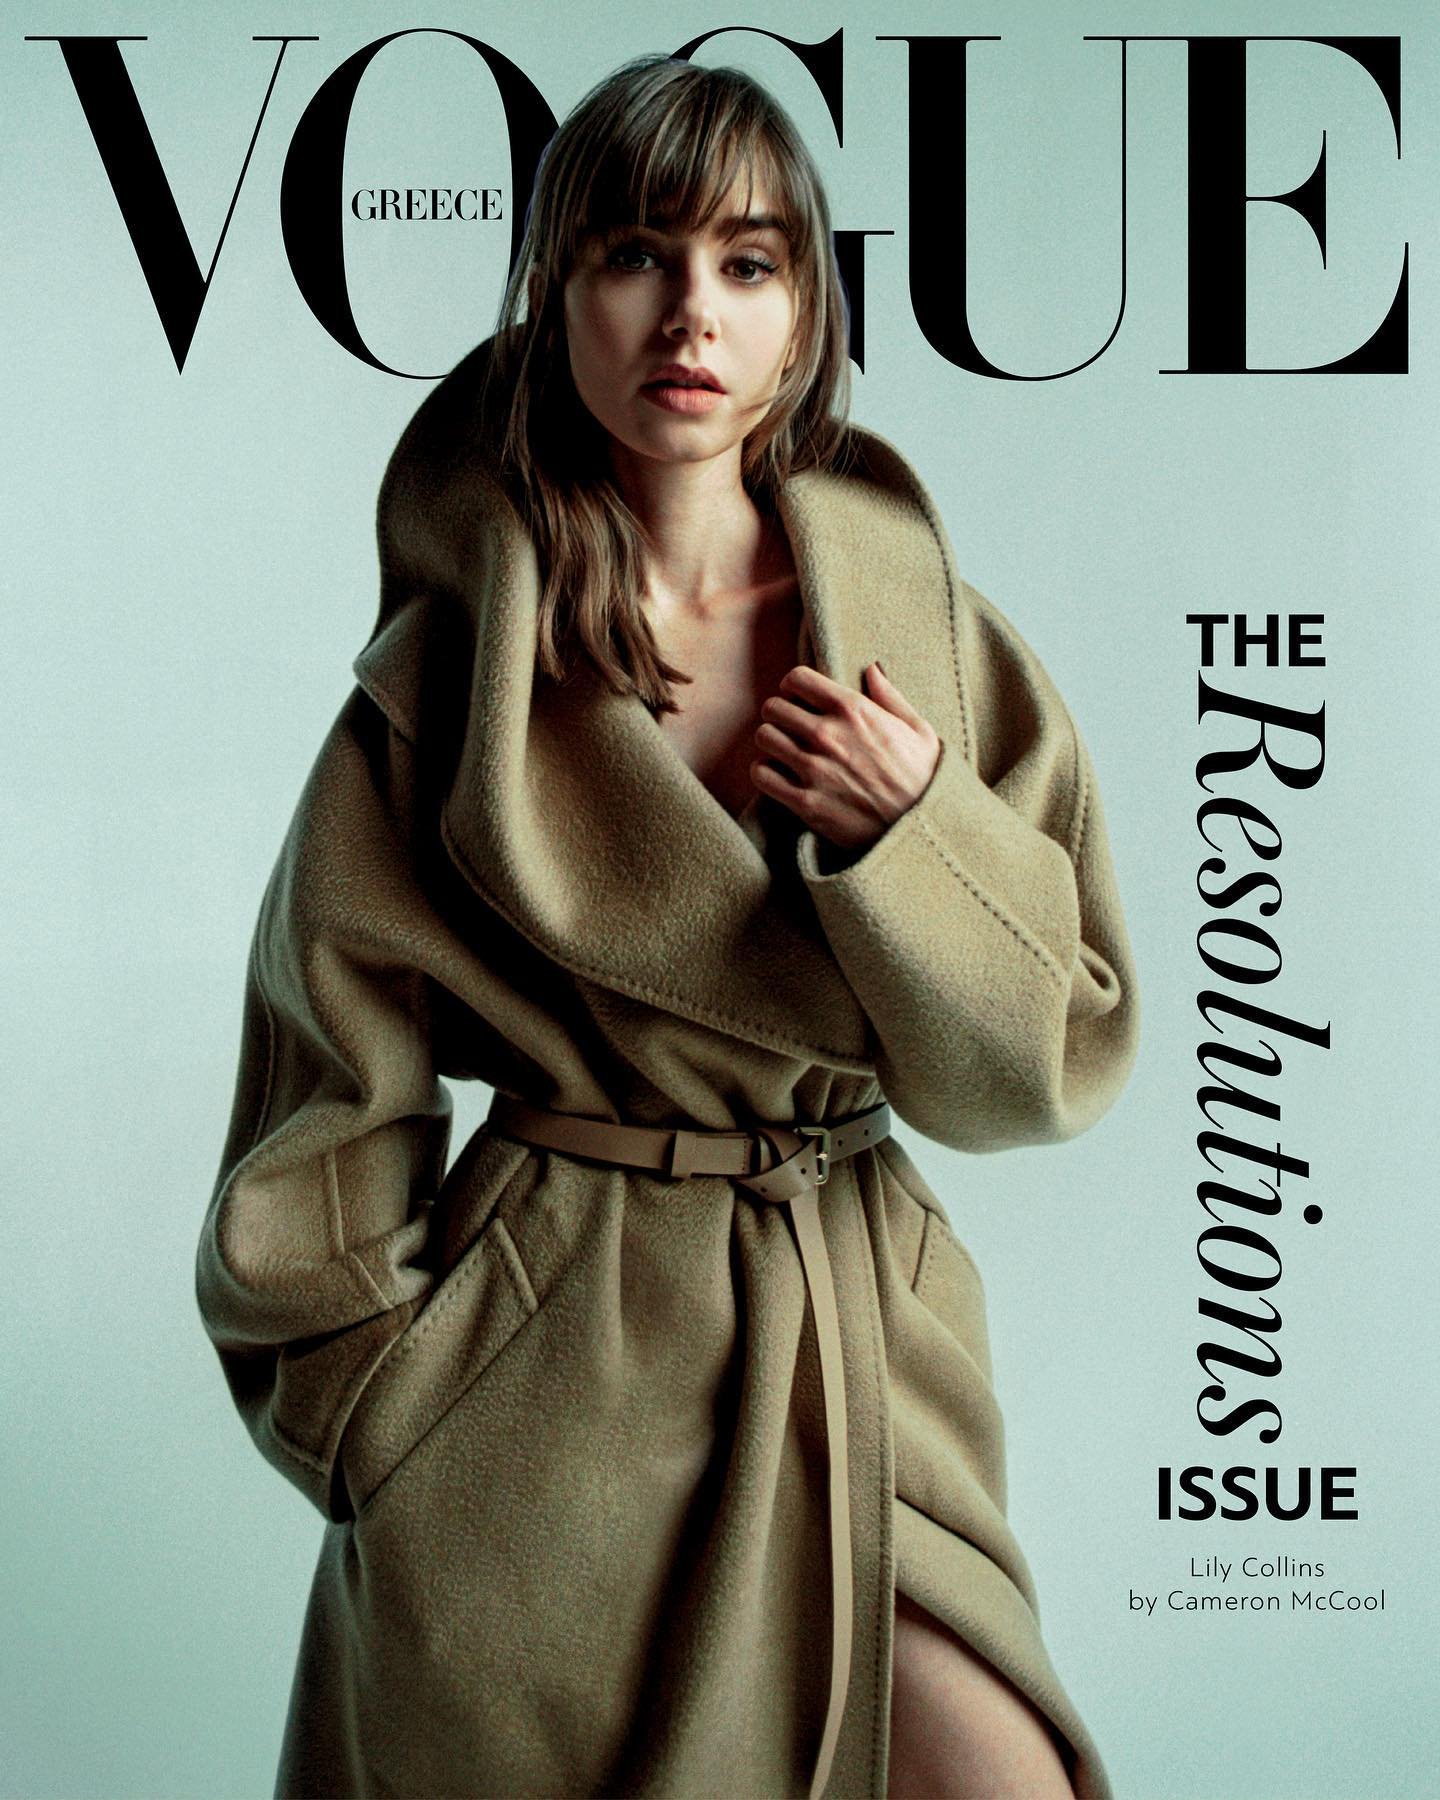 Lily-Collins-by-Cameron-McCool-Vogue-Greece-January-2023-00005.jpg